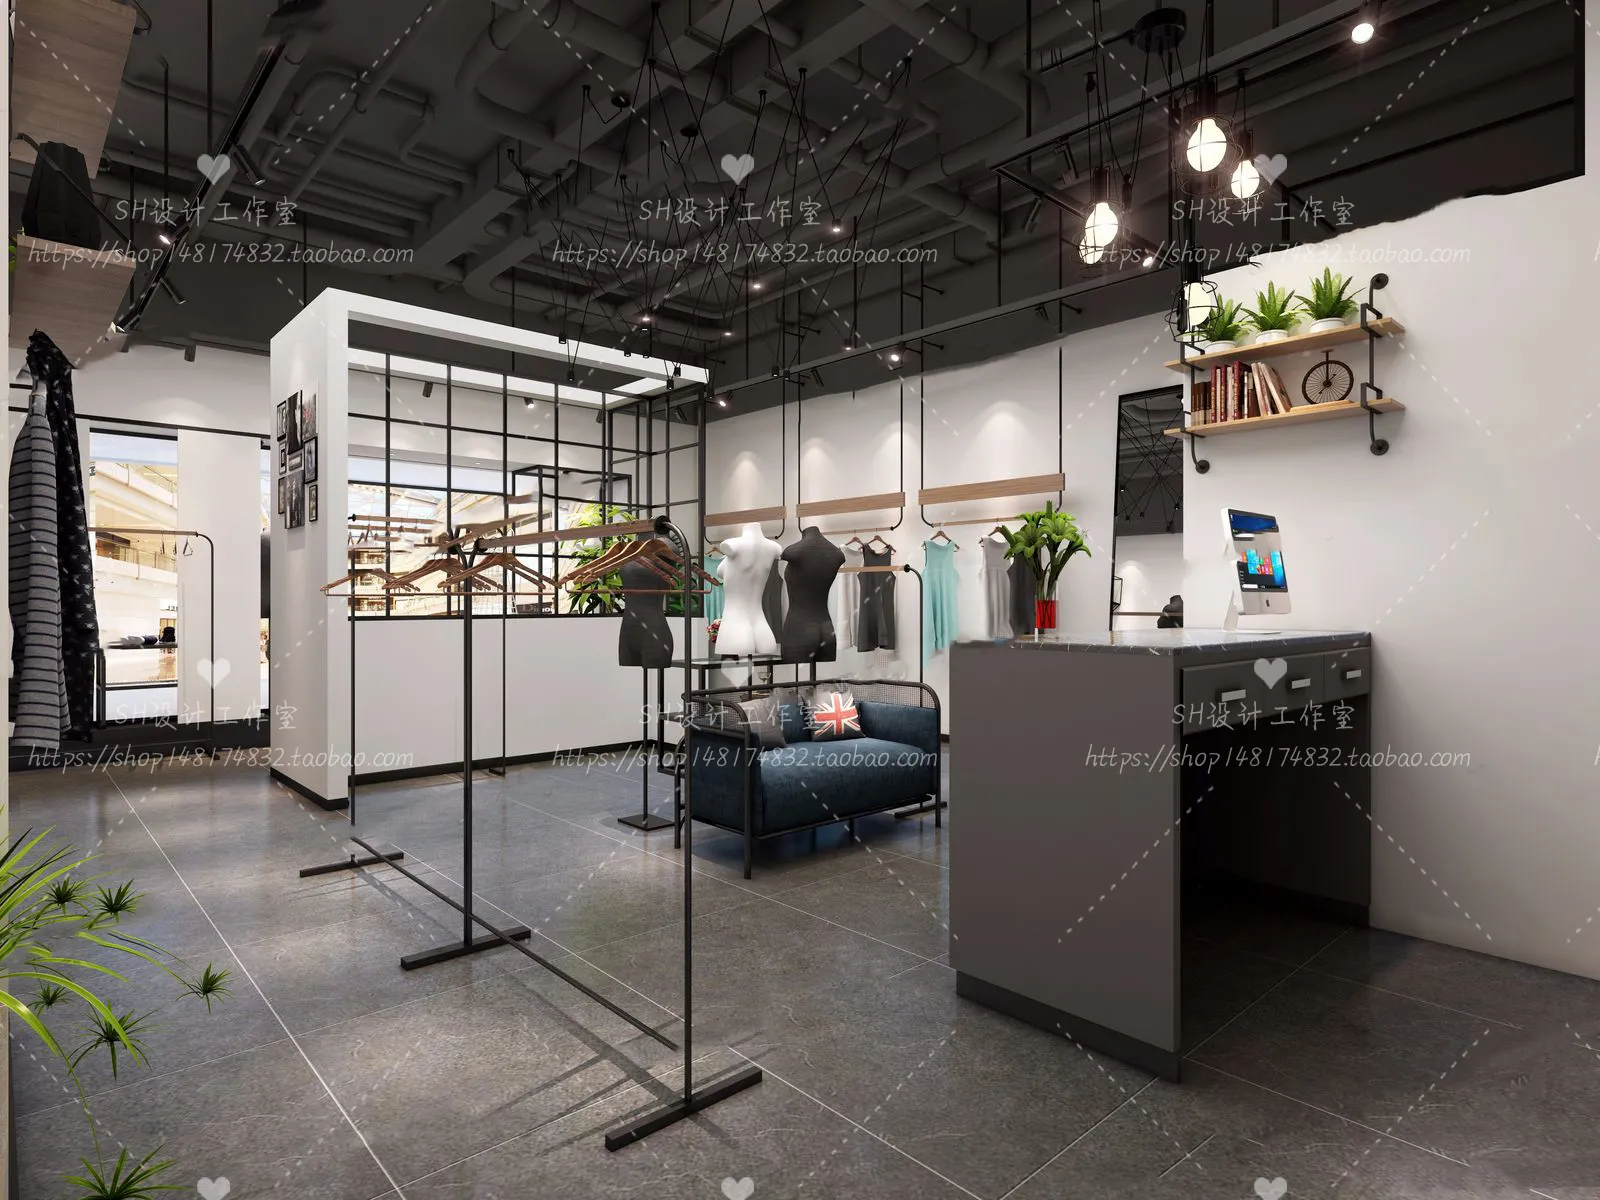 CLOTHING STORE 3D SCENES – VRAY RENDER – 42